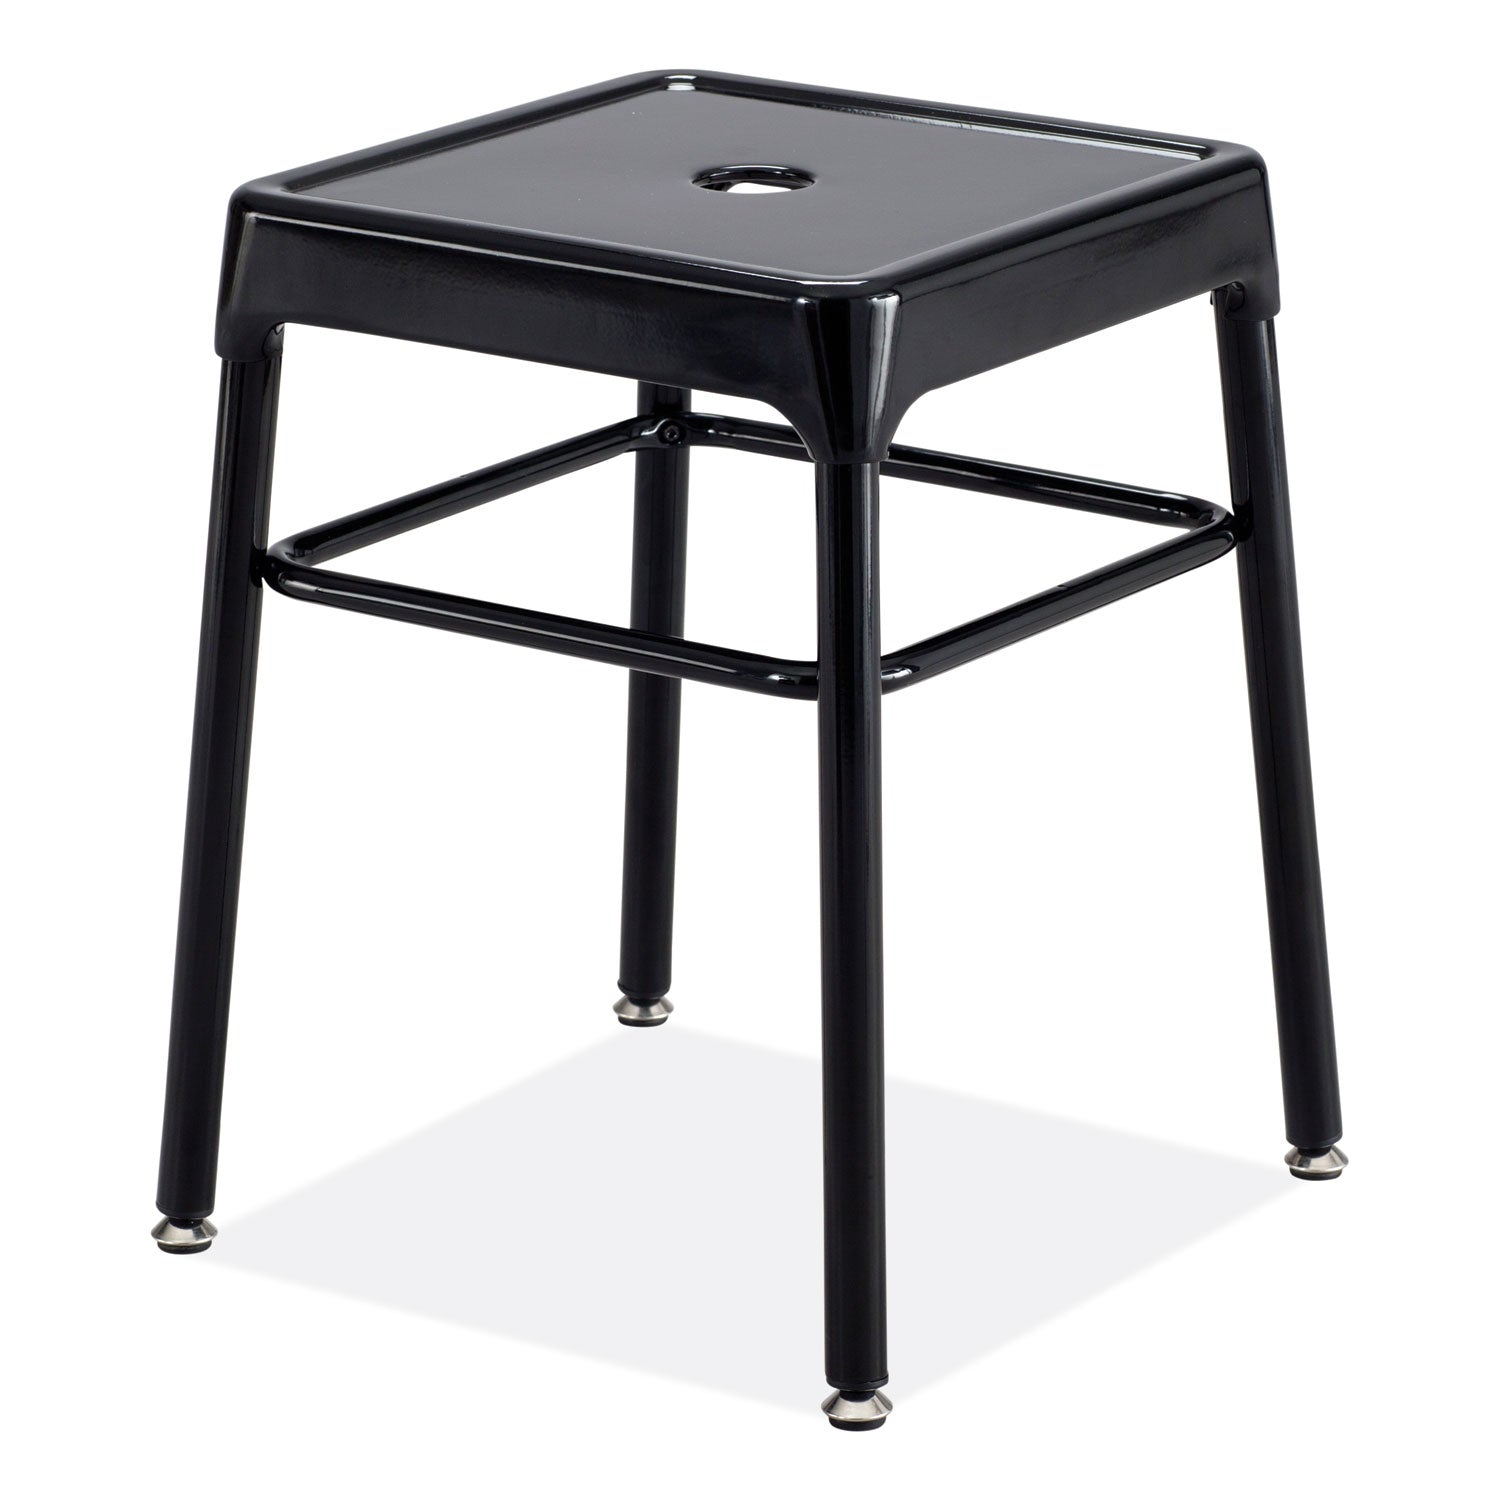 steel-guestbistro-stool-backless-supports-up-to-250-lb-18-seat-height-black-seat-black-base-ships-in-1-3-business-days_saf6604bl - 4